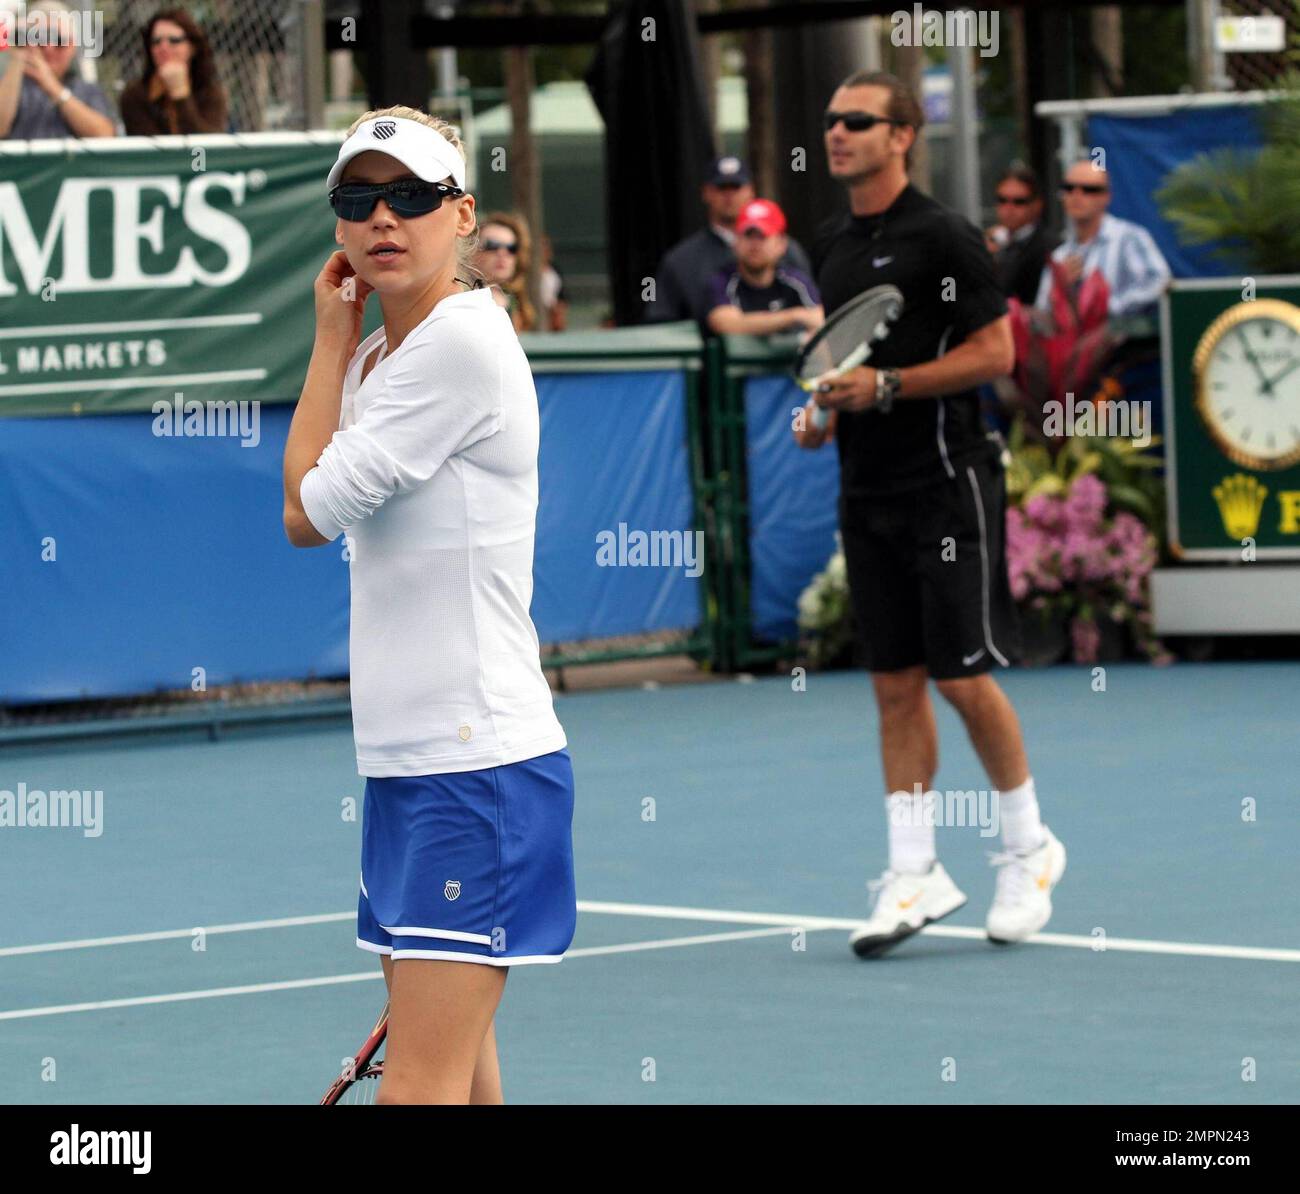 Tennis great Anna Kournikova and her brother Allan share a hug after her  match in the Chris Evert Pro-Celebrity Tennis Classic at the Delray Beach  Tennis Center in Delray Beach, FL. 11/07/10